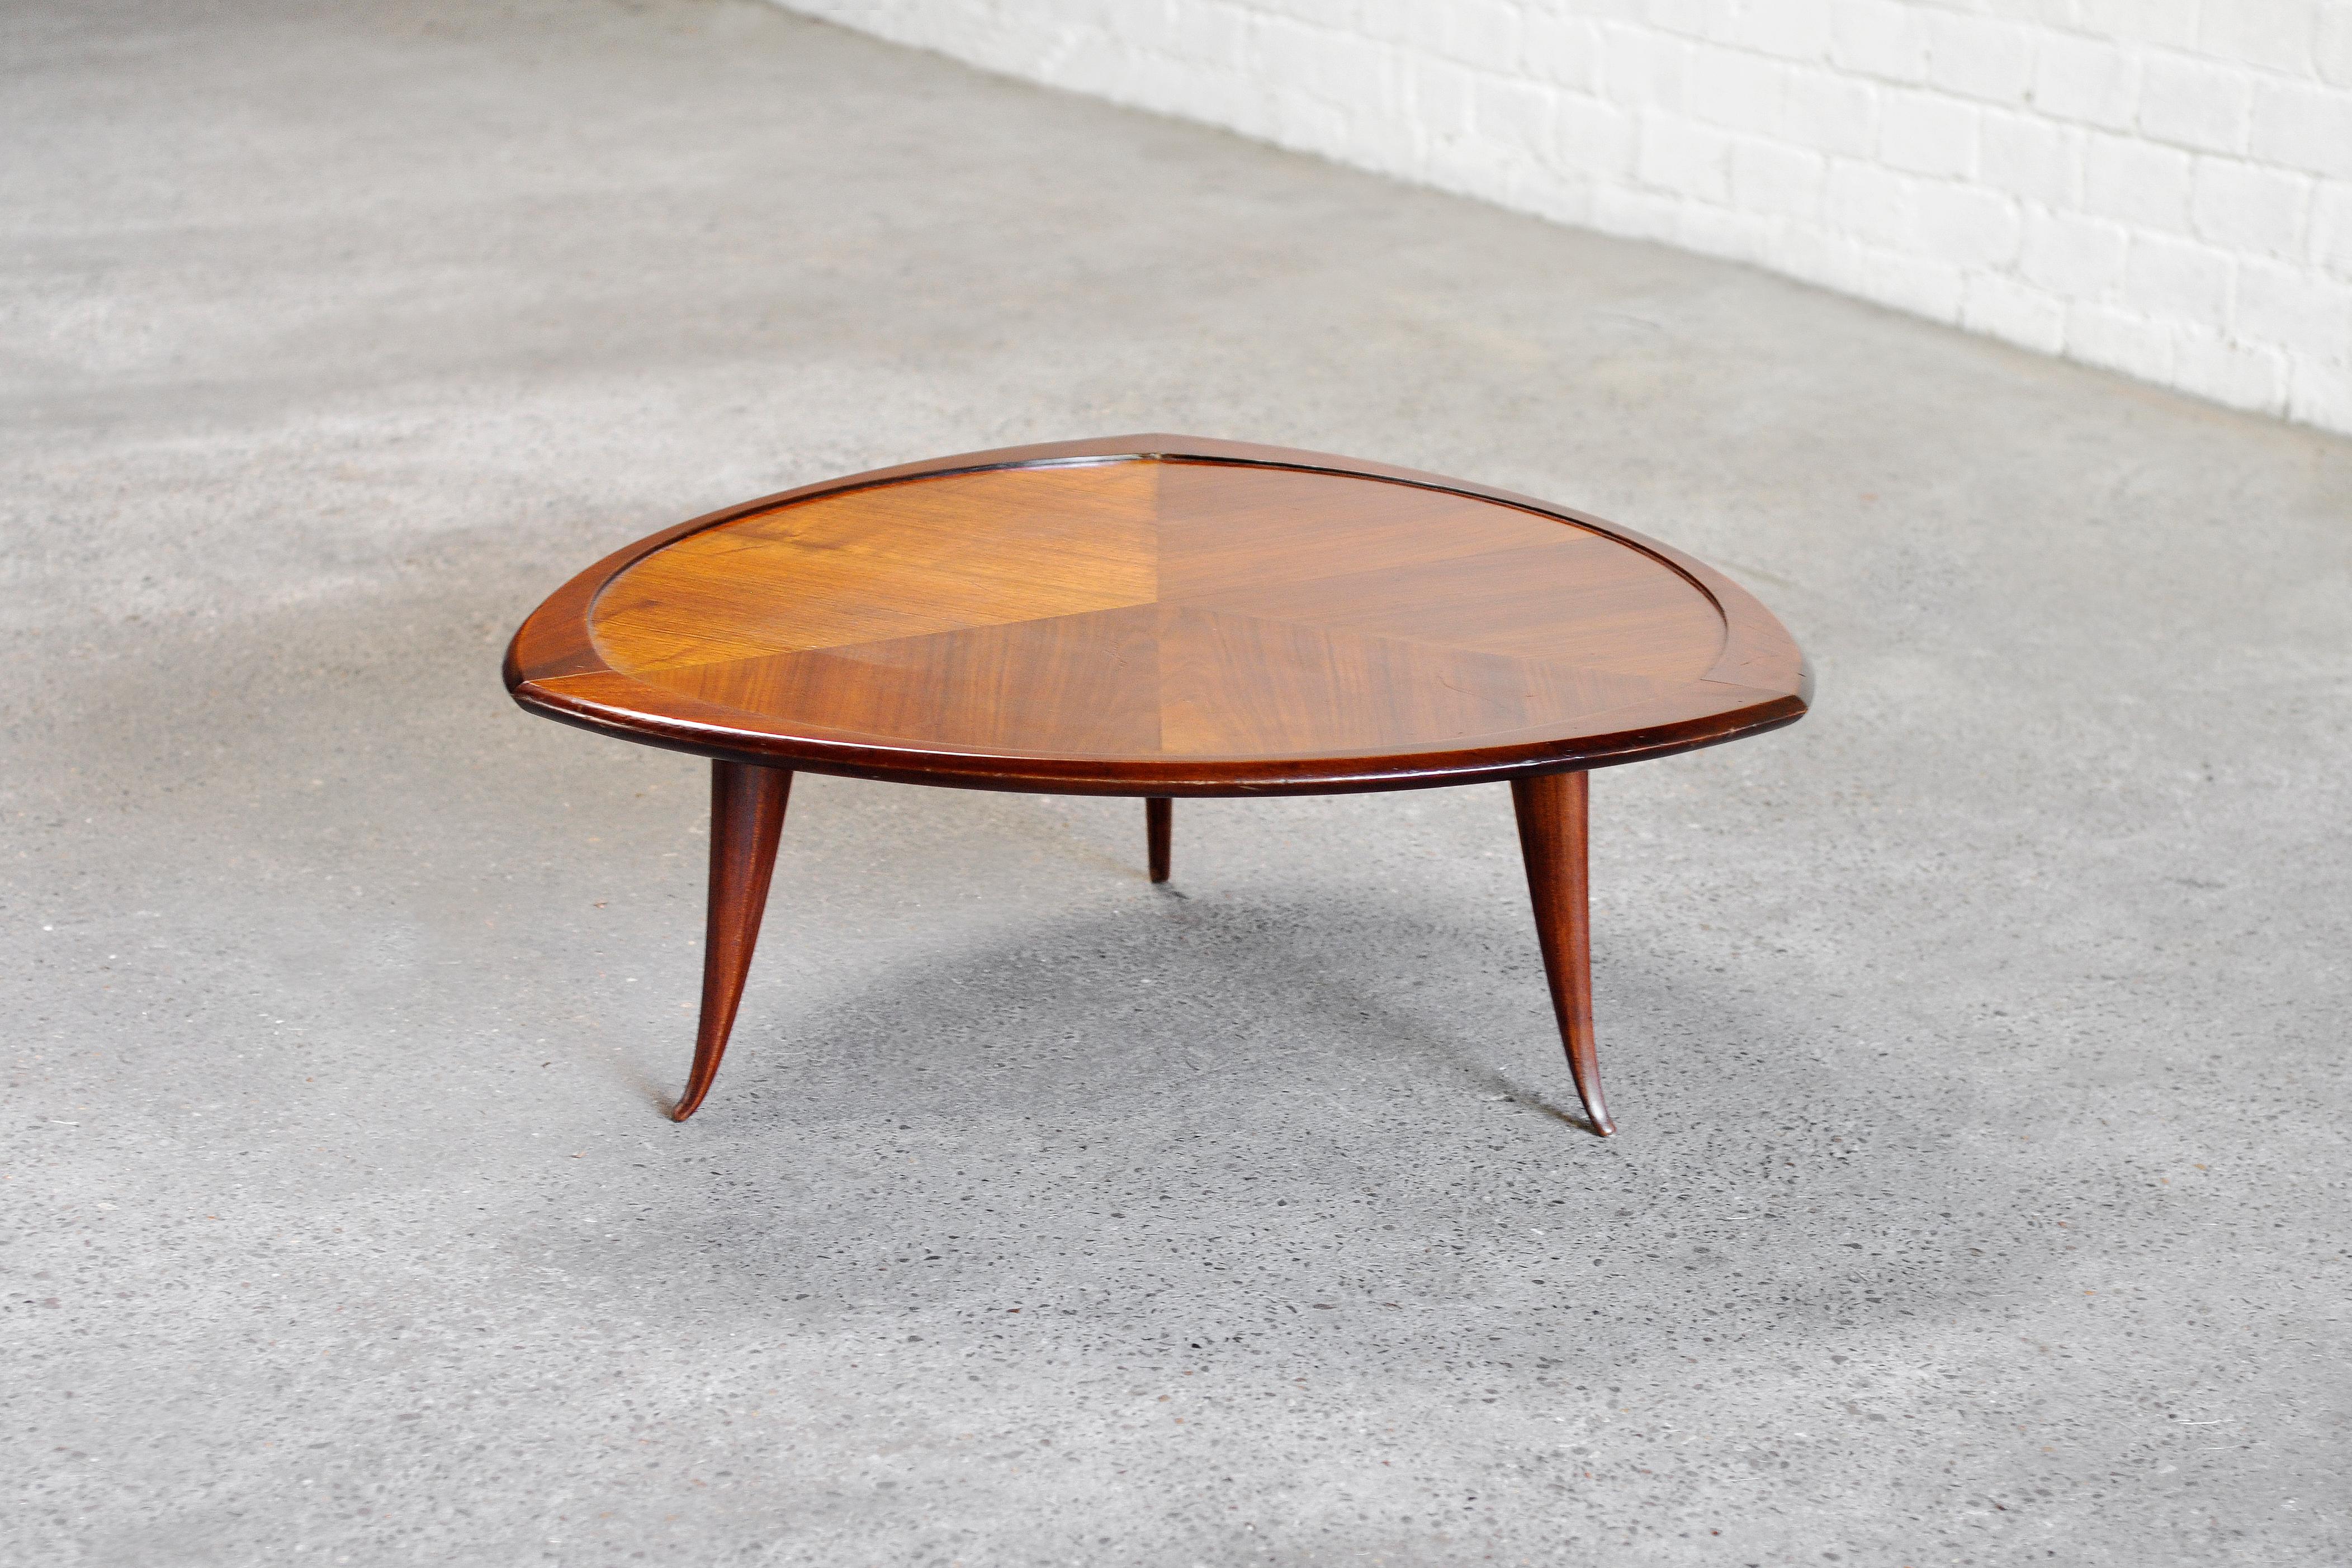 A 1960's Italian designer coffee table crafted from a blend of various wood types. Thanks to its distinctive and uniquely shaped tabletop, this table exudes a decorative and unique aesthetic. The legs are sculpted into gently curving cones which